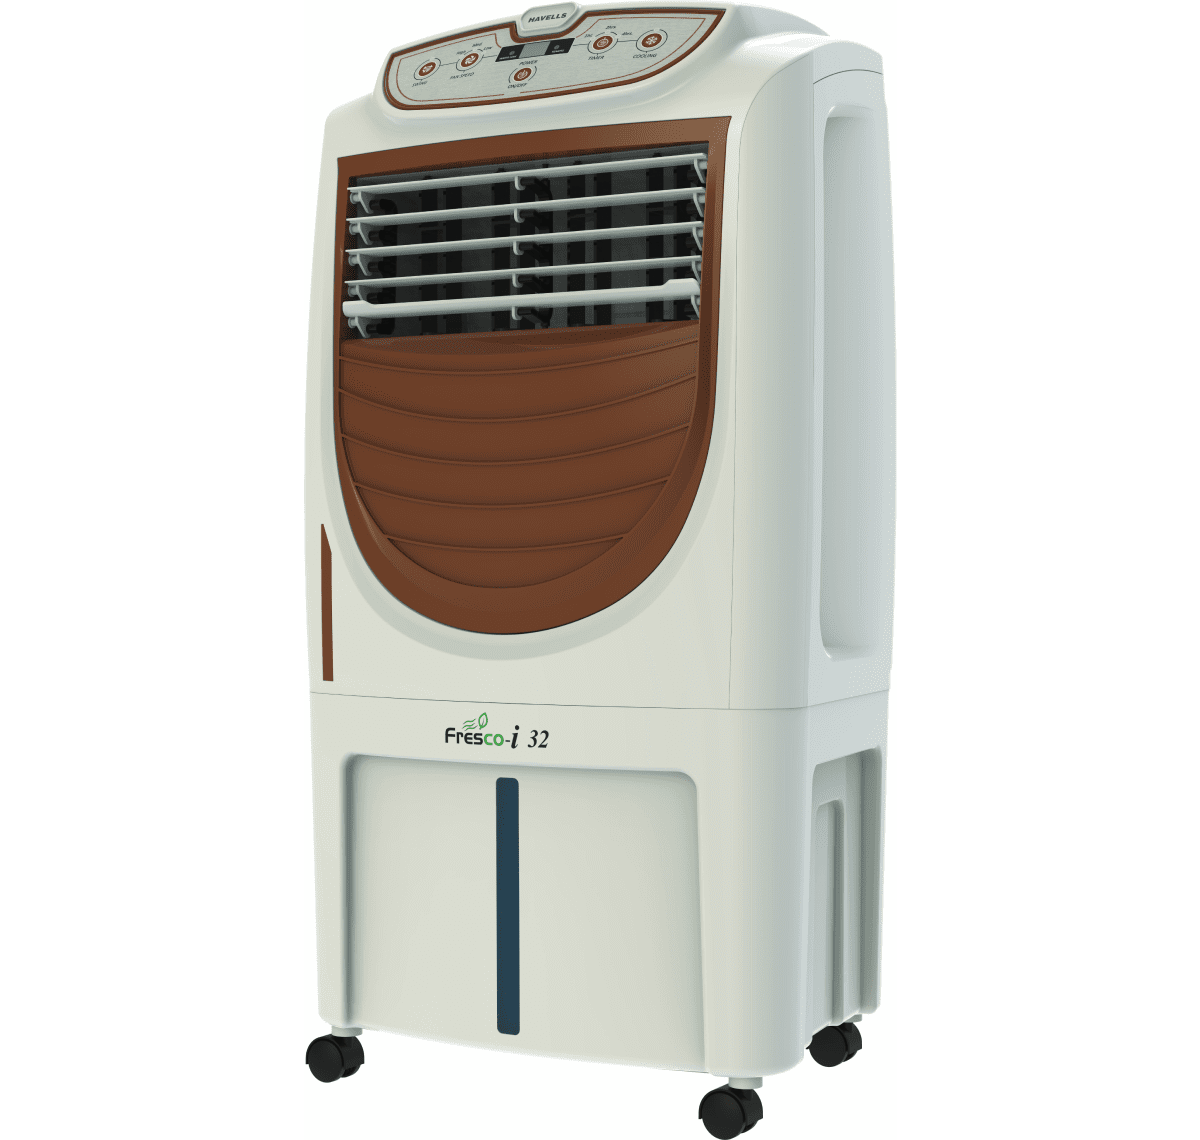 Havells Fresco-i 32 (32-litre) Personal Air Cooler On Dillimall.Com